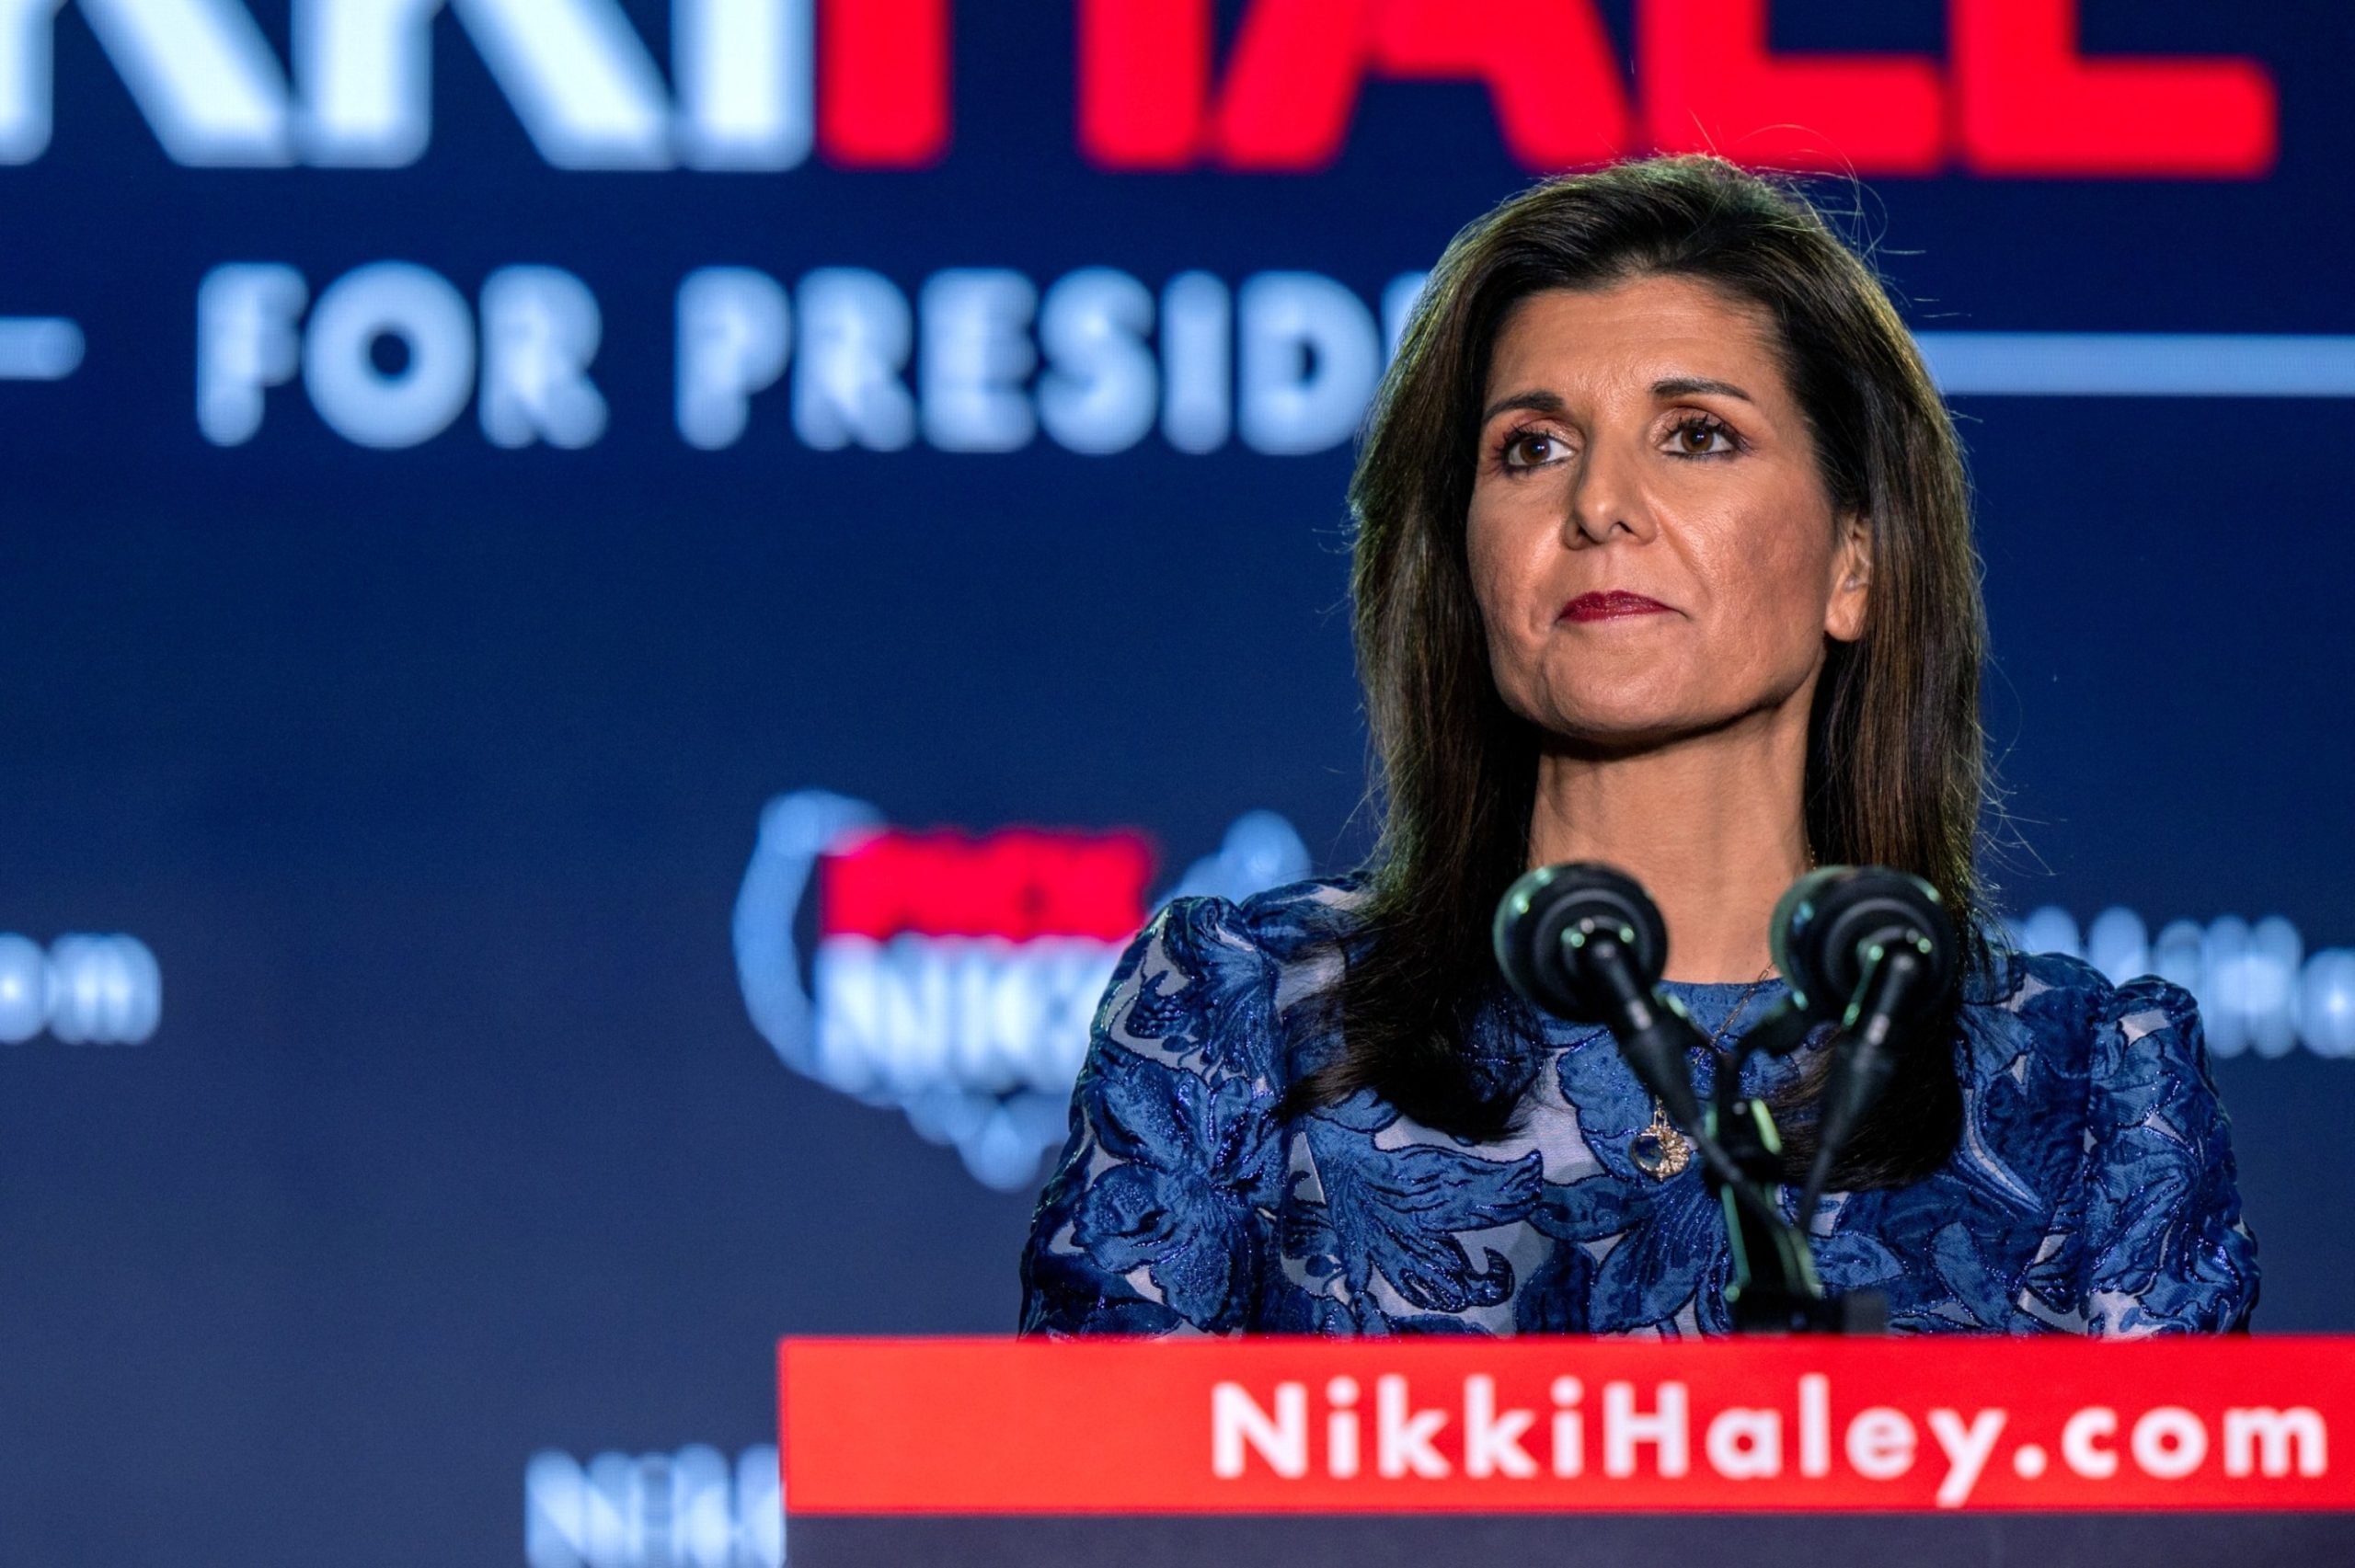 Nikki Haley Pledges to Stay in Race Following New Hampshire Loss: 'Race is Far from Over!'